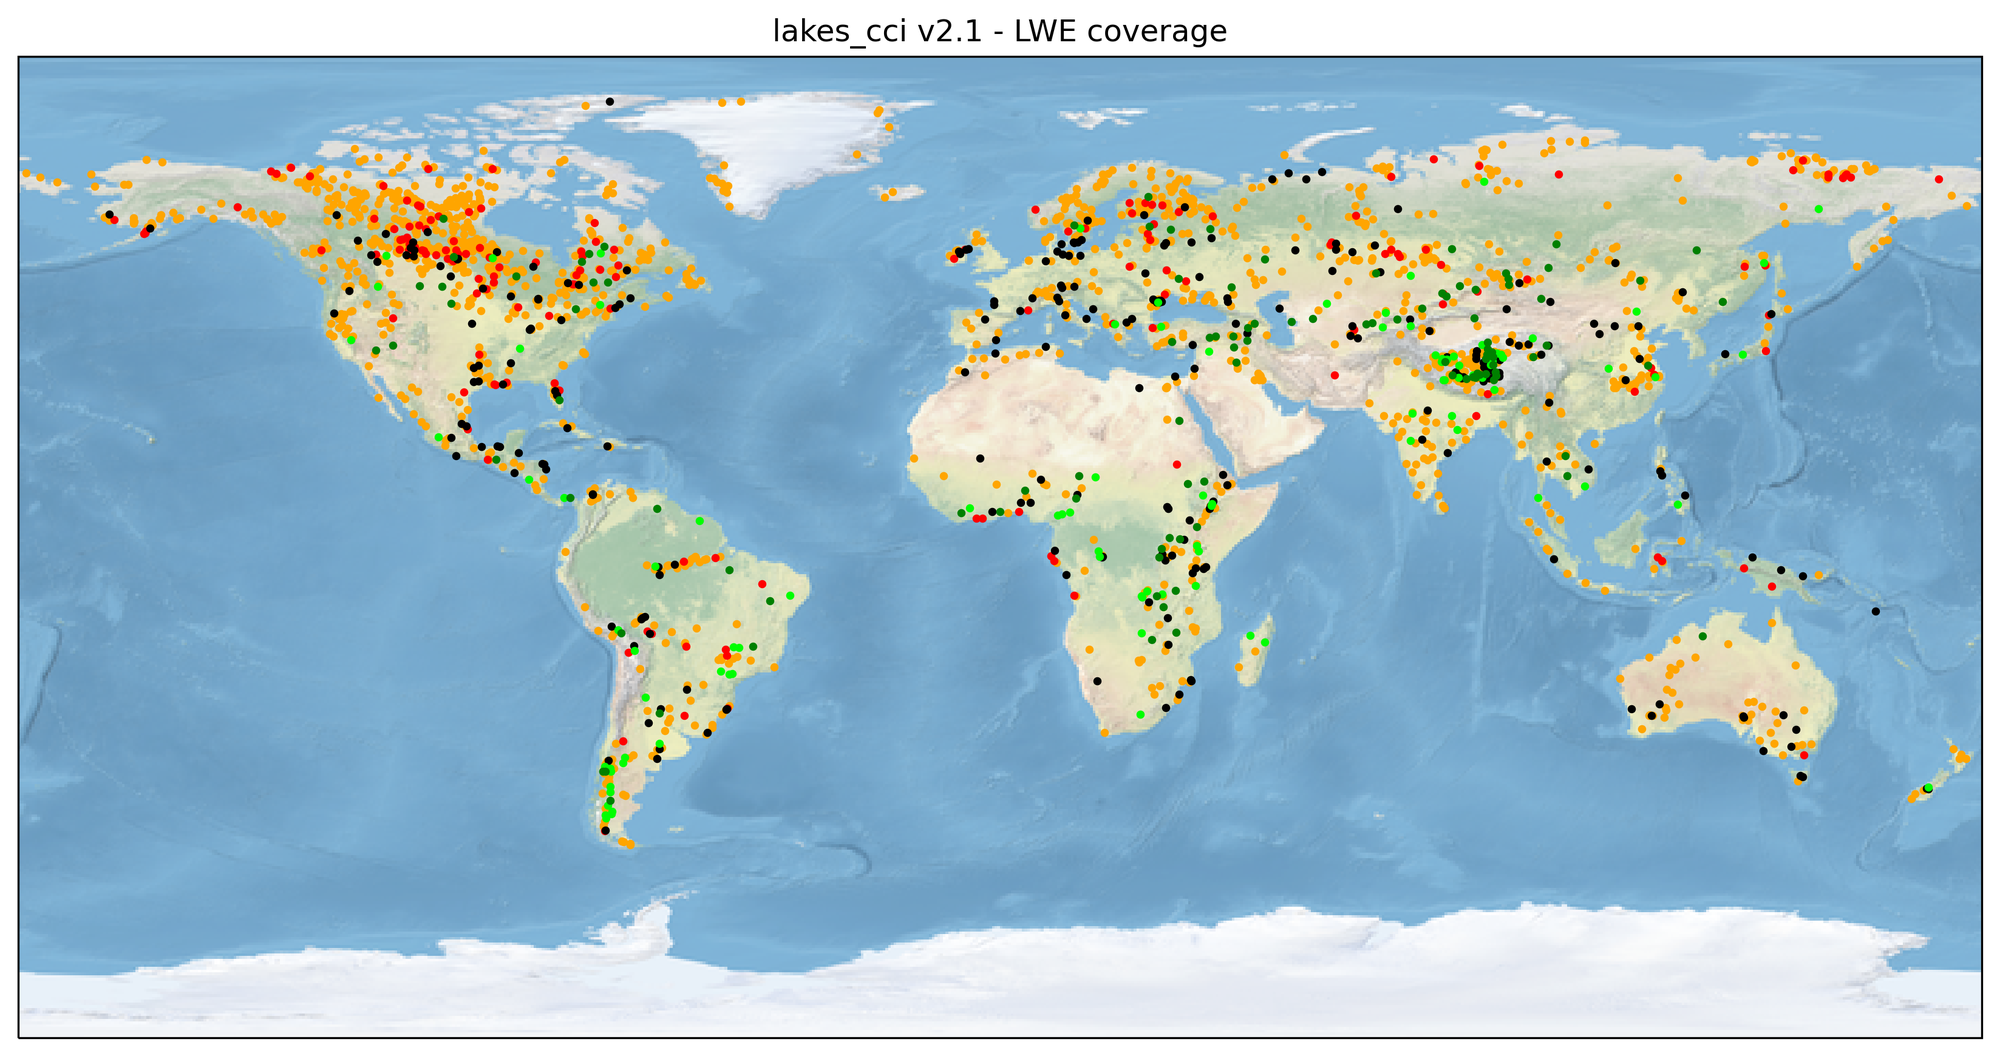 Lake Water Extent - Spatial coverage (starting in 1992)